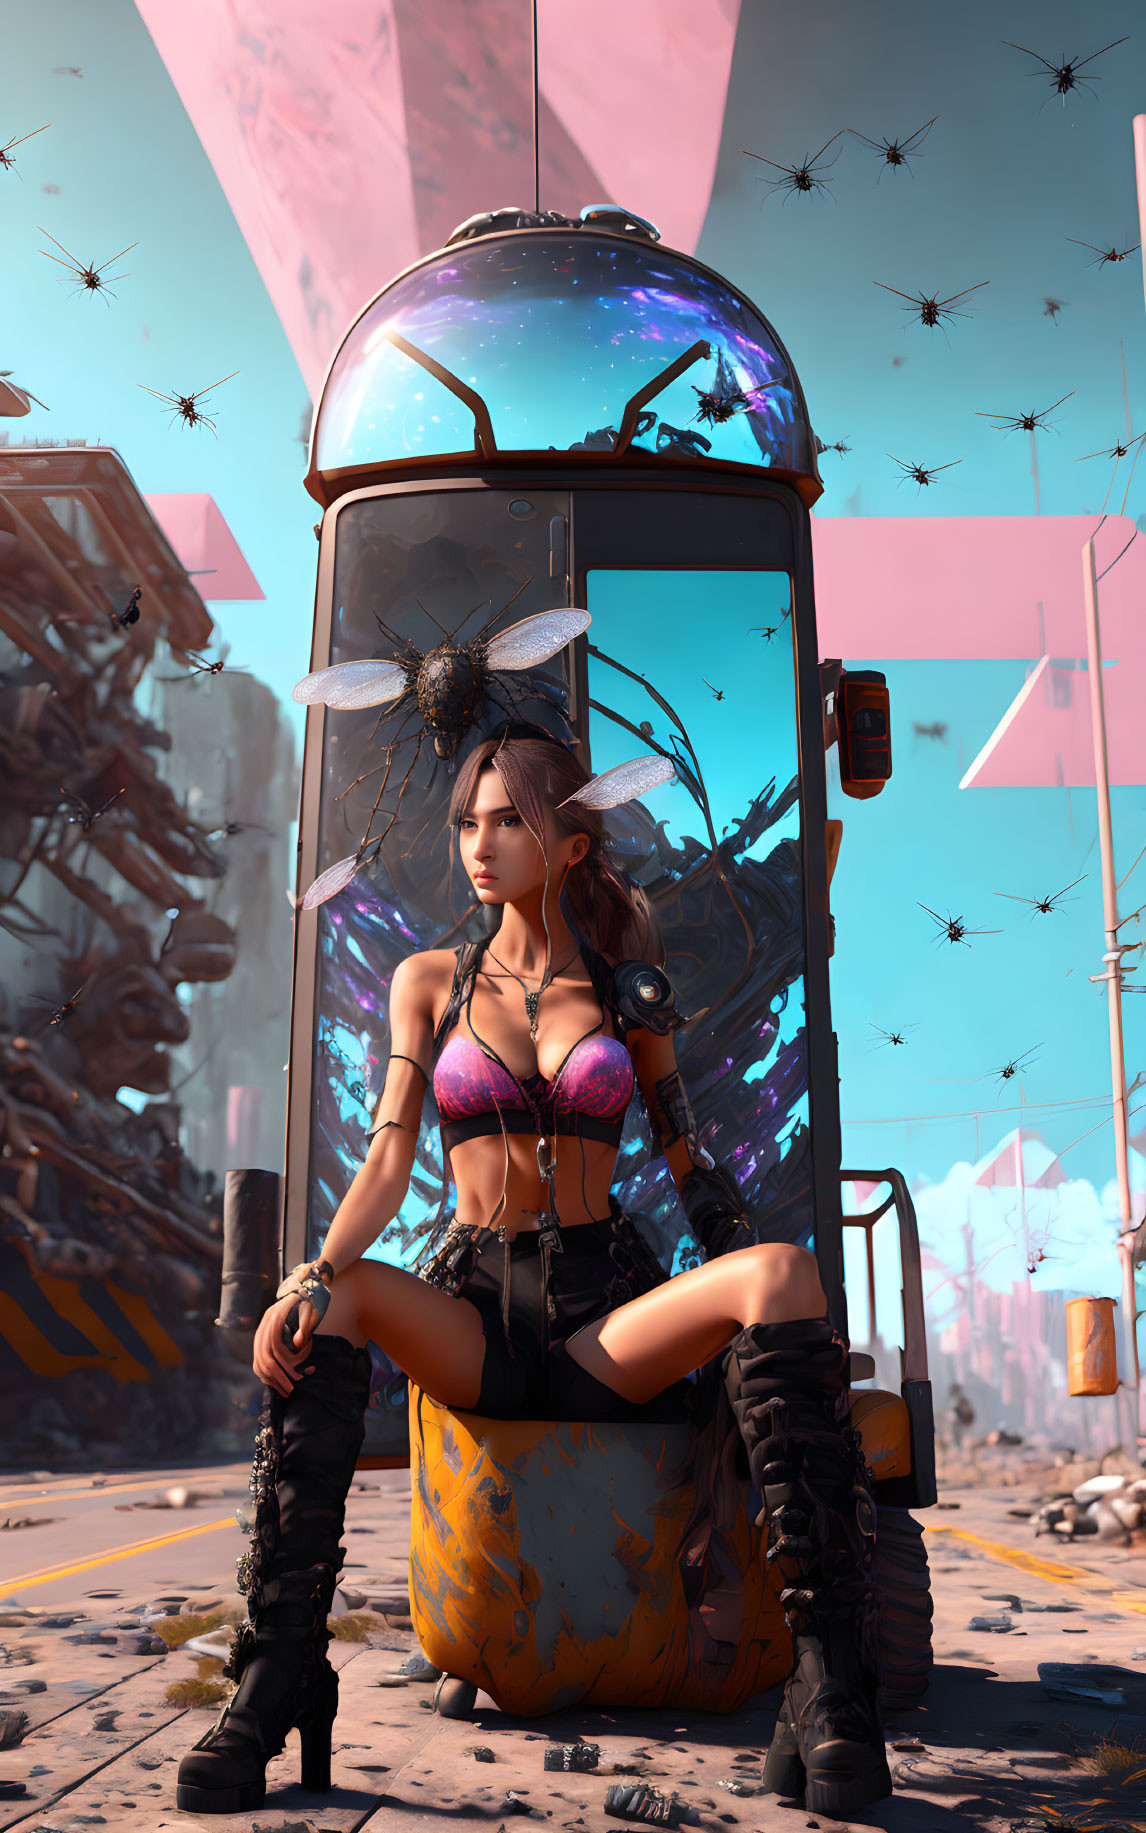 Futuristic woman sitting by armored pod in desert with drones